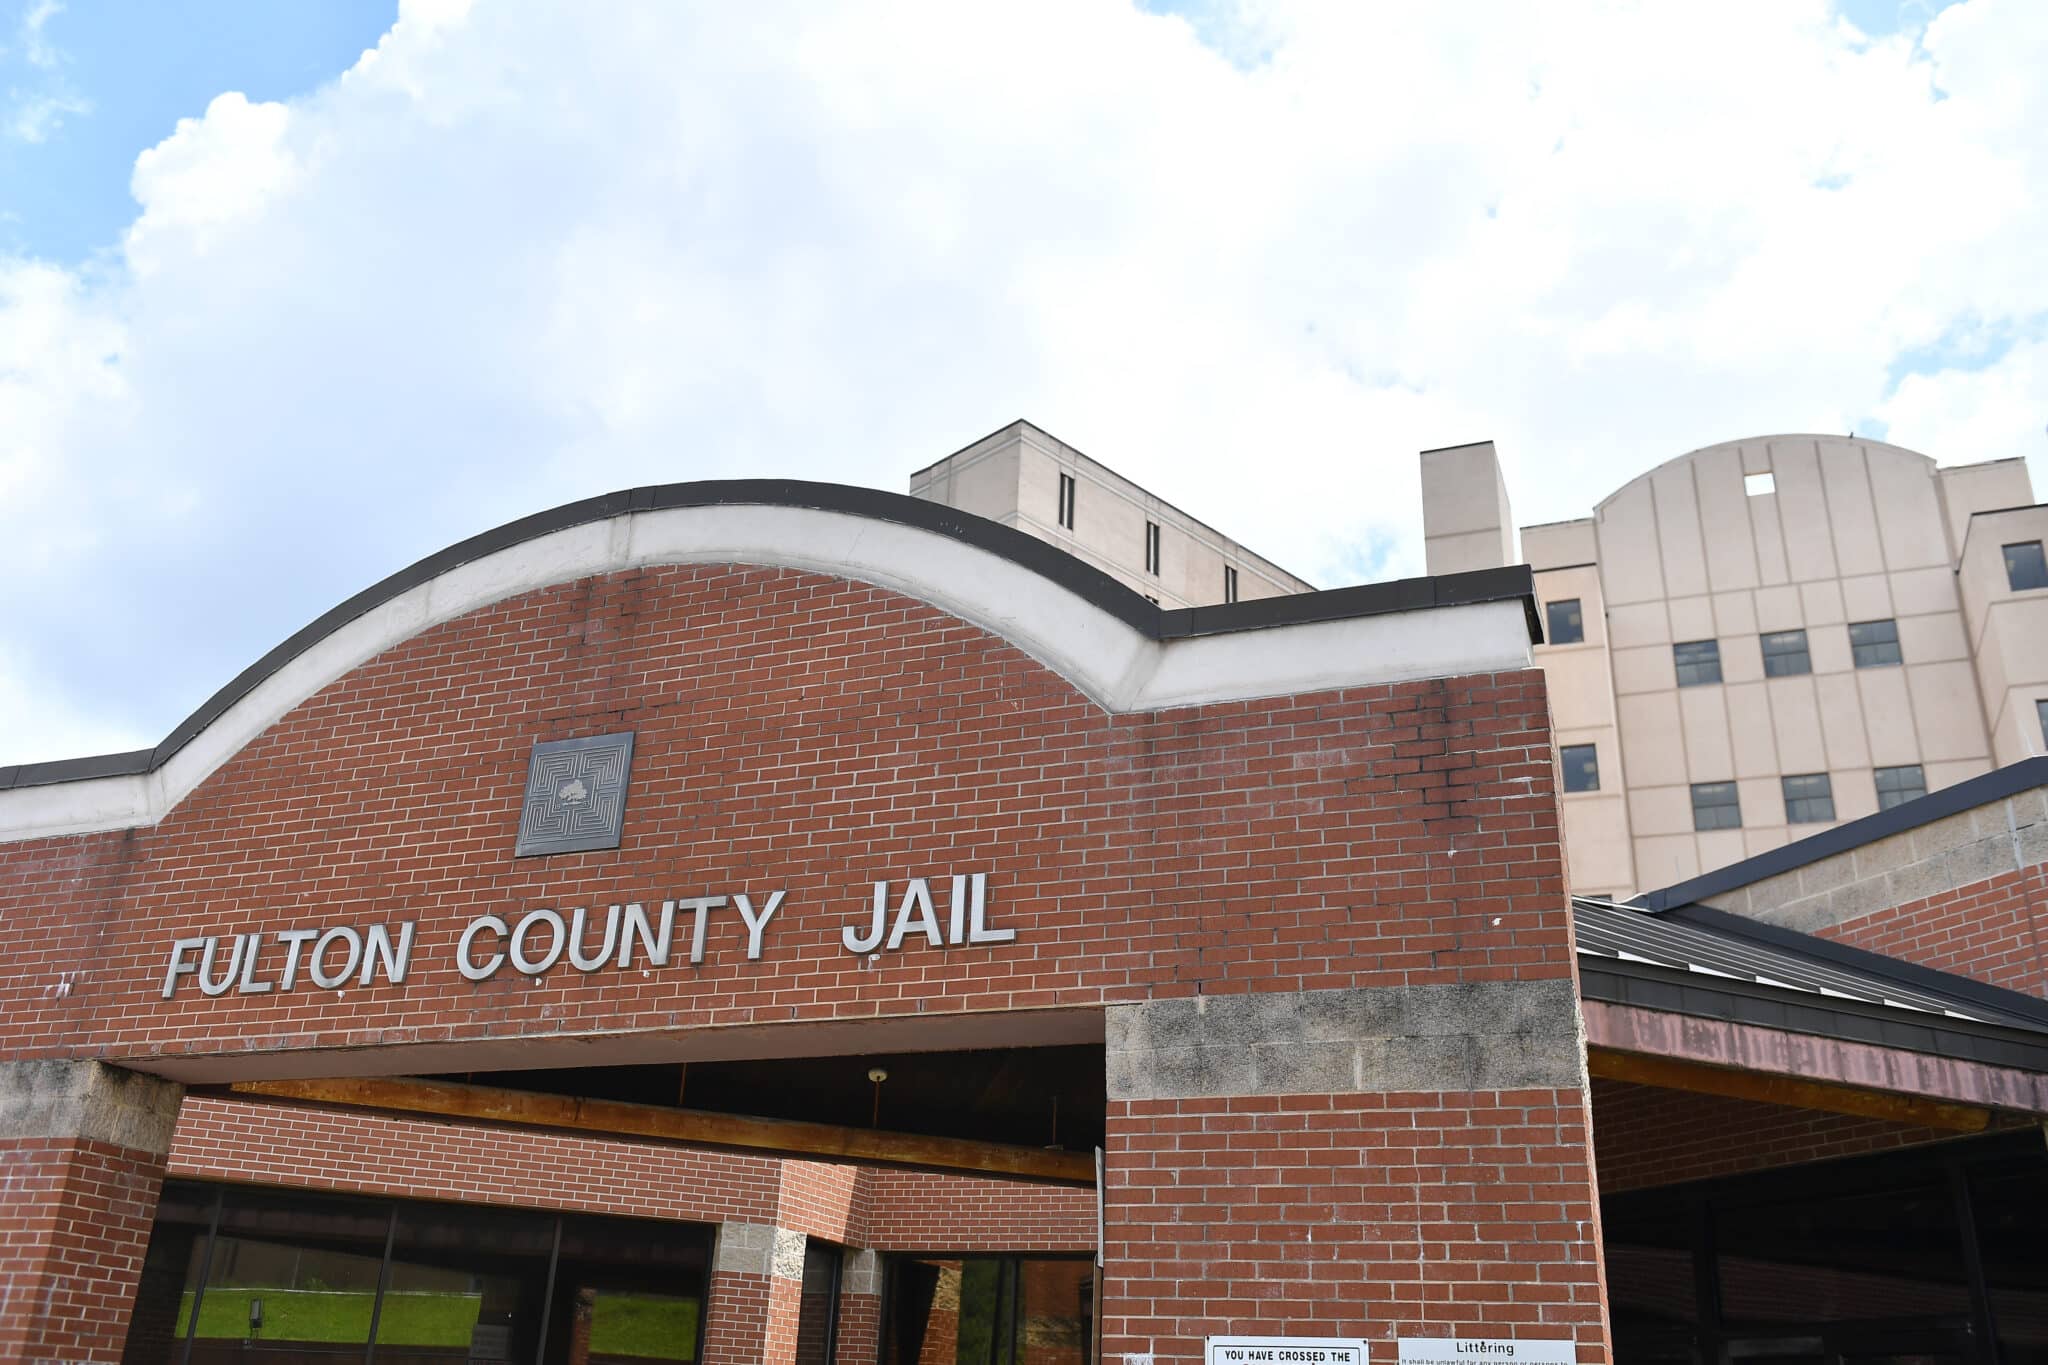 The brick entrance of Fulton County Jail in Atlanta, where Chase Staub currently resides.